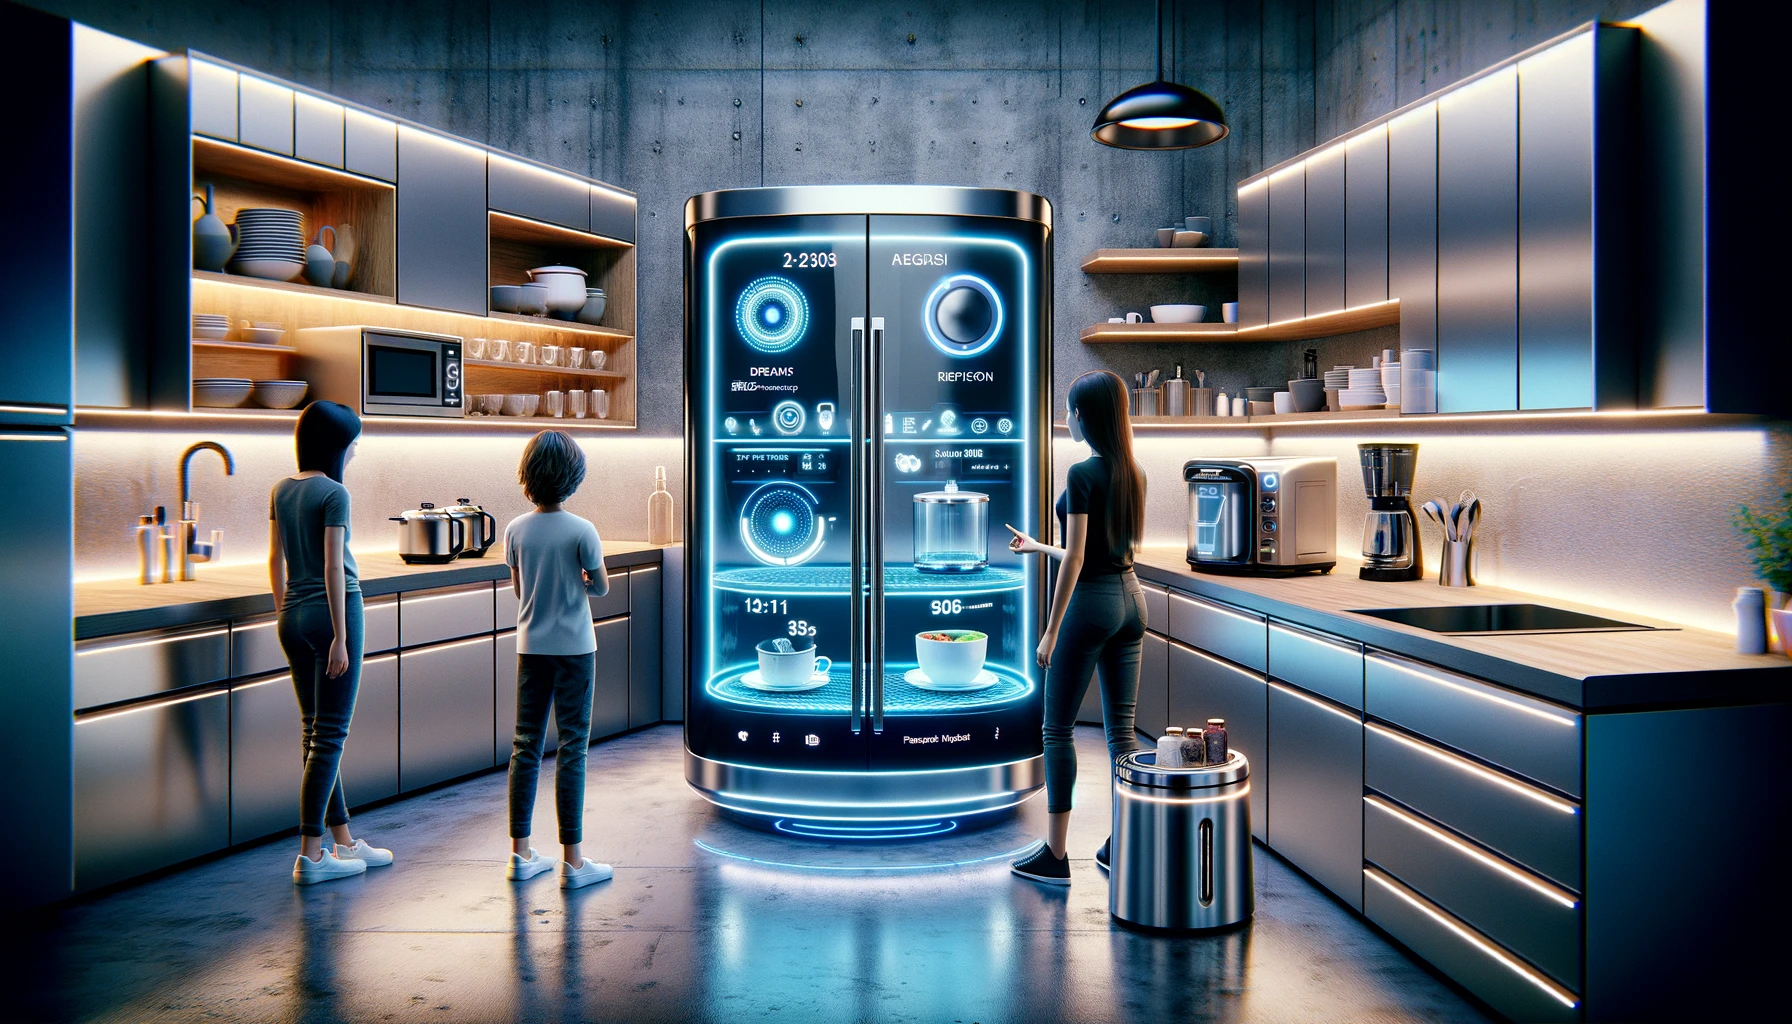 Futuristic kitchen with smart appliance and interactive interface.